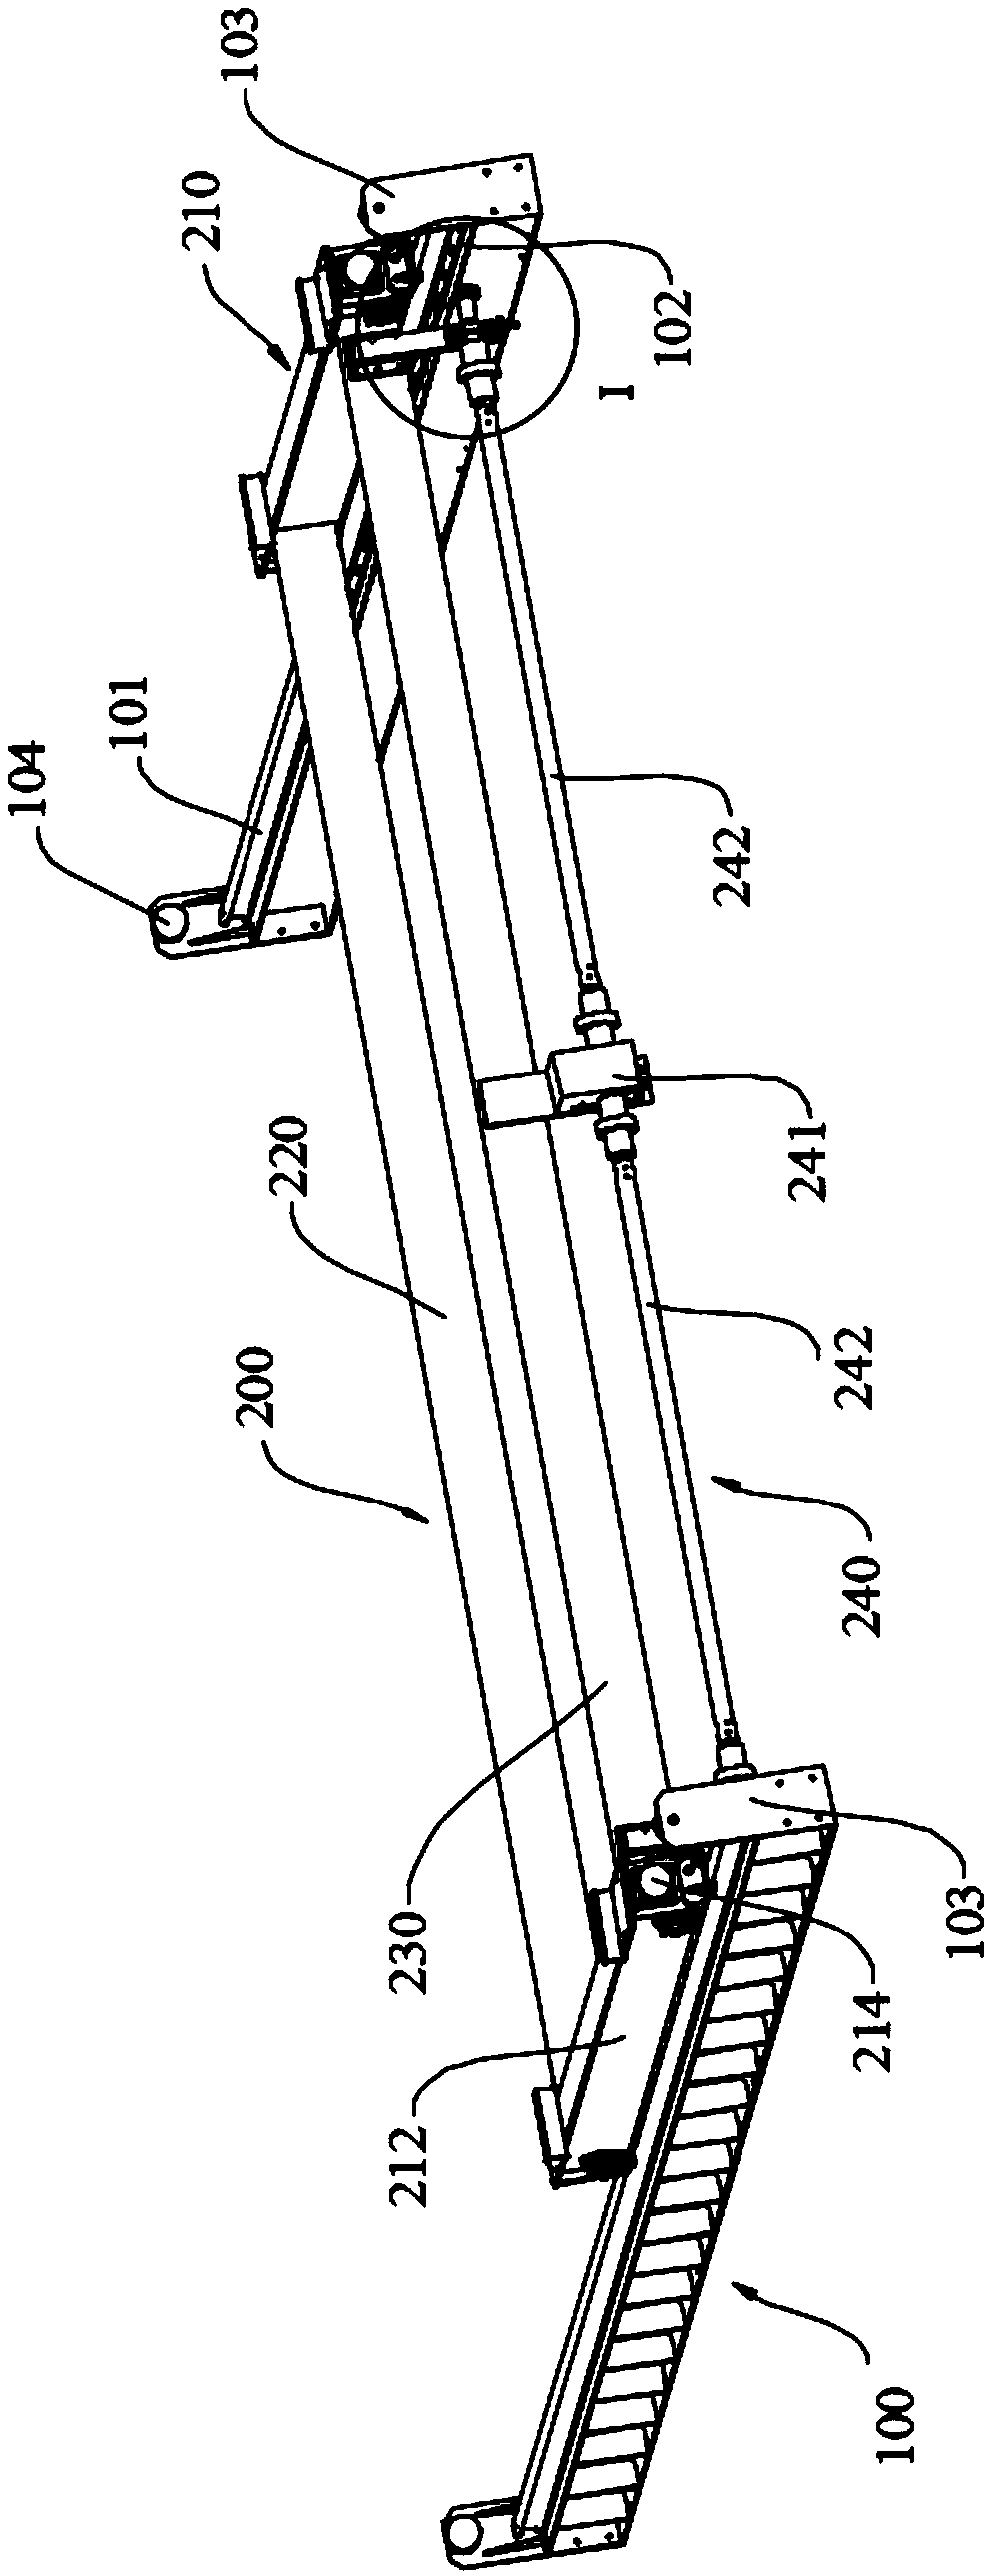 Concrete distributing device and prefabricated part production line